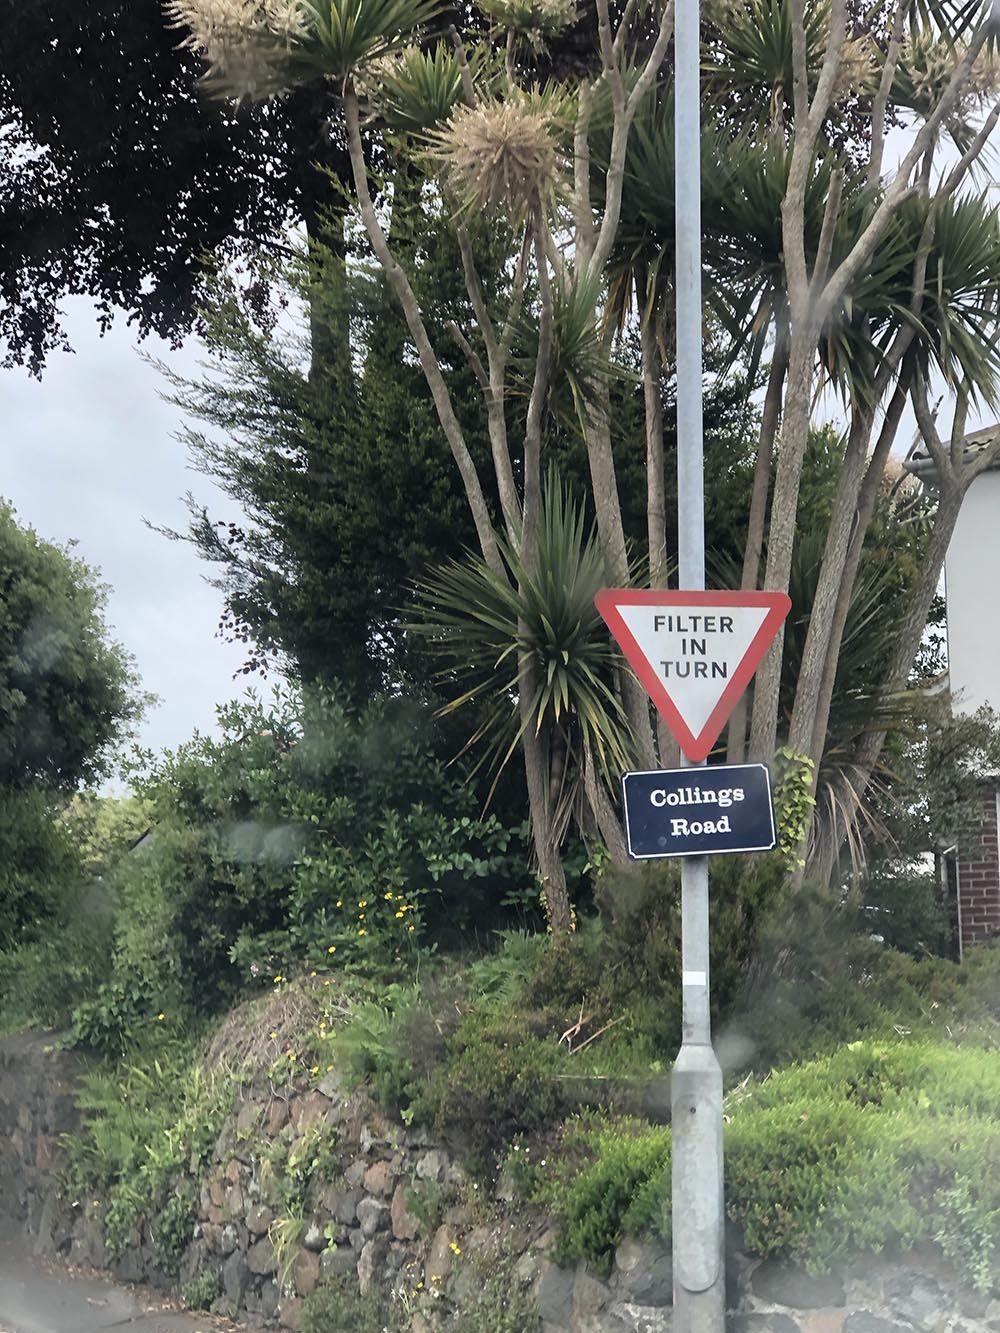 Driving on the Isle of Guernsey